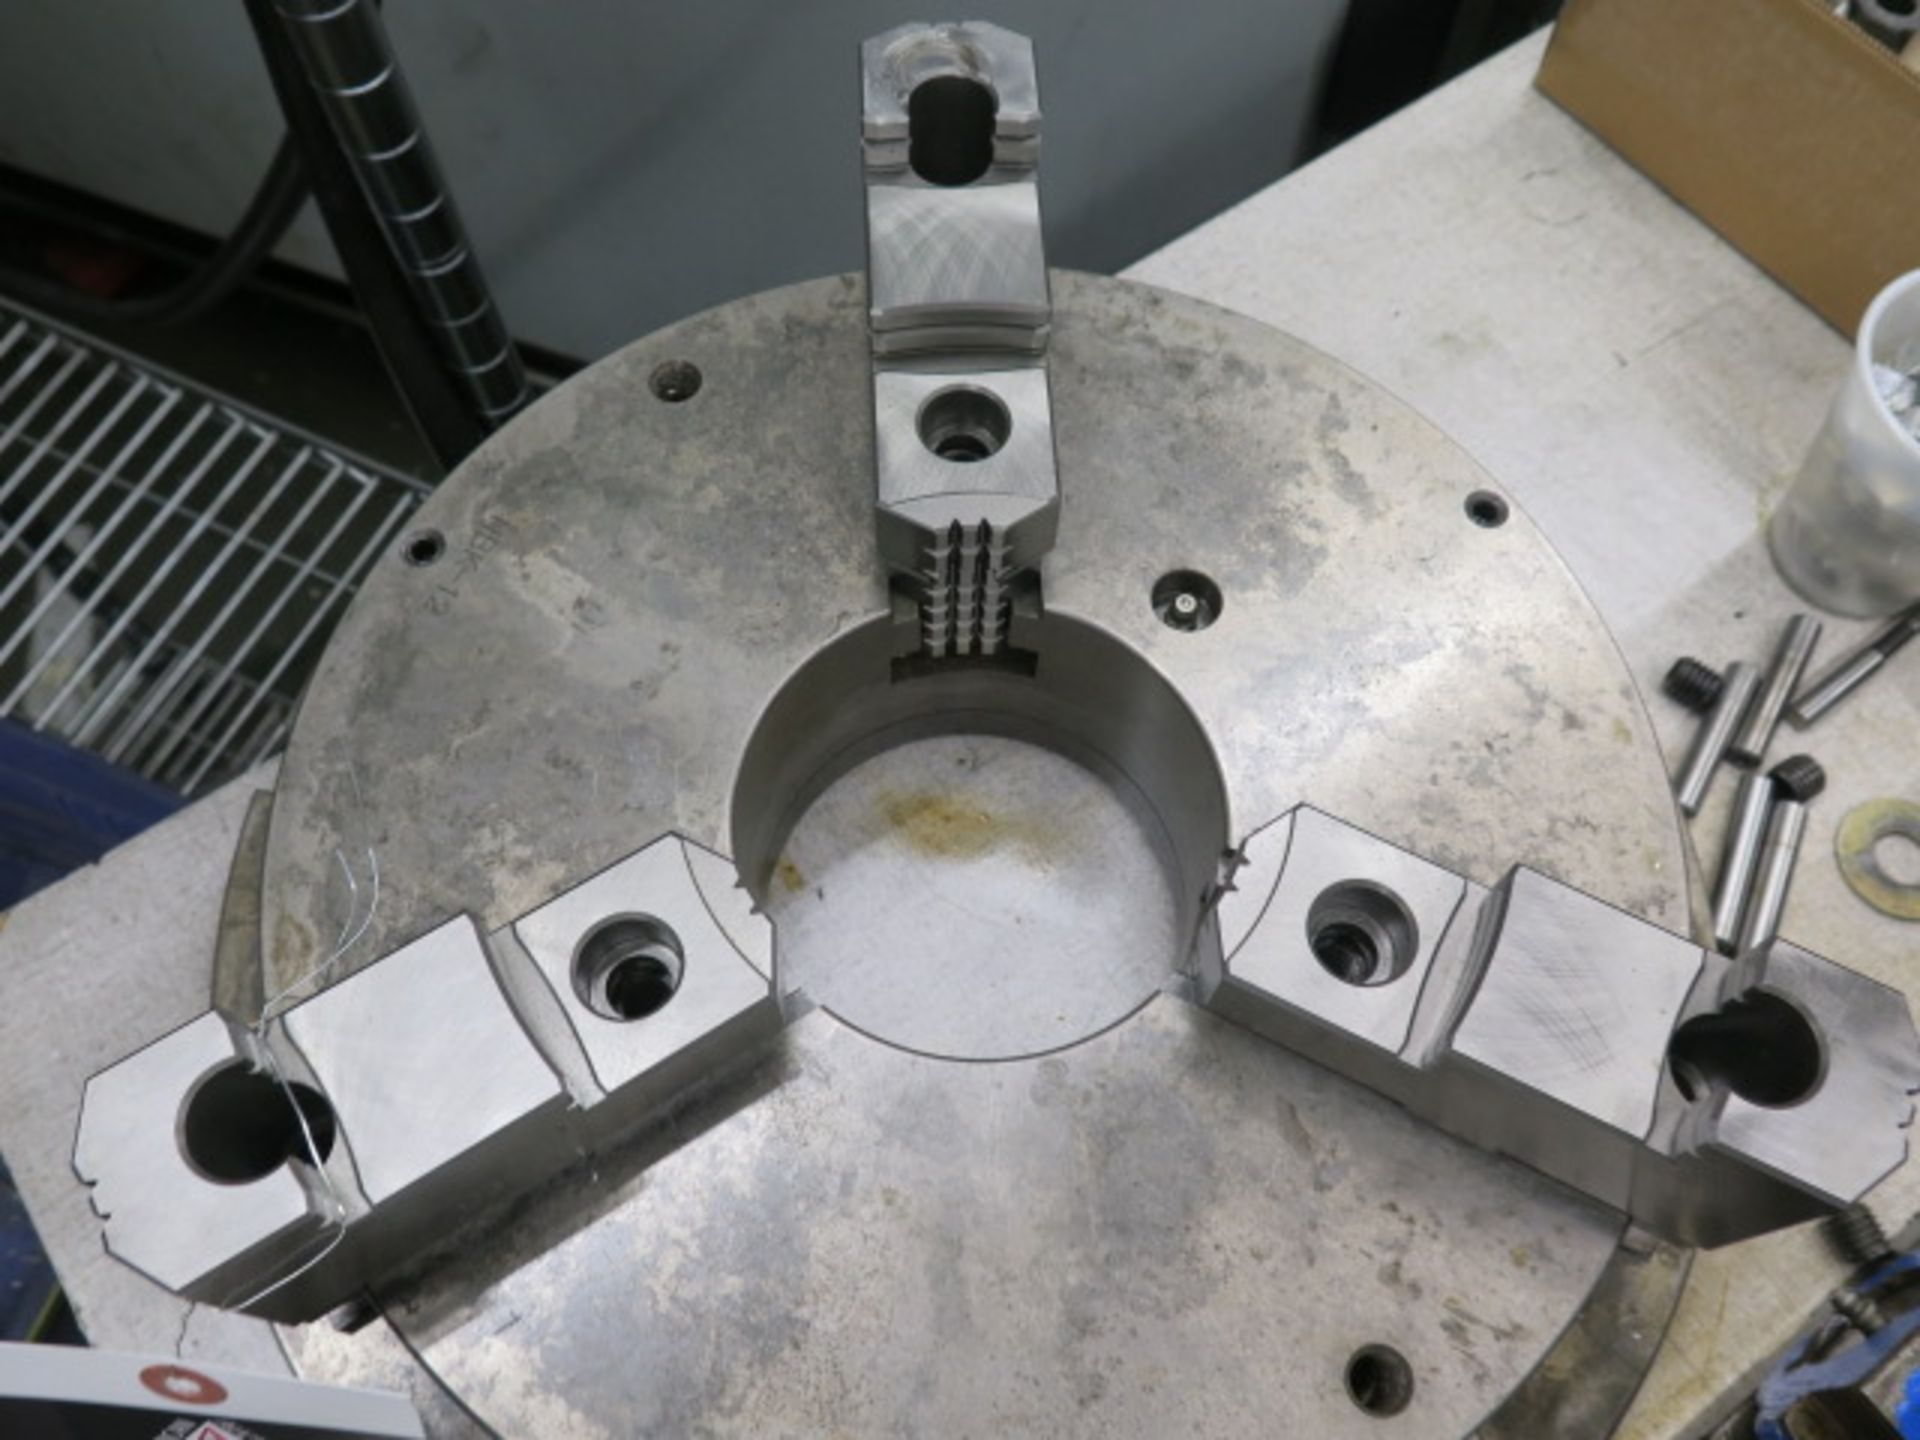 NBK-12 12" 3-Jaw Chuck w/ Rotary Head / Mill Table Mounting Base (SOLD AS-IS - NO WARRANTY) - Image 3 of 7